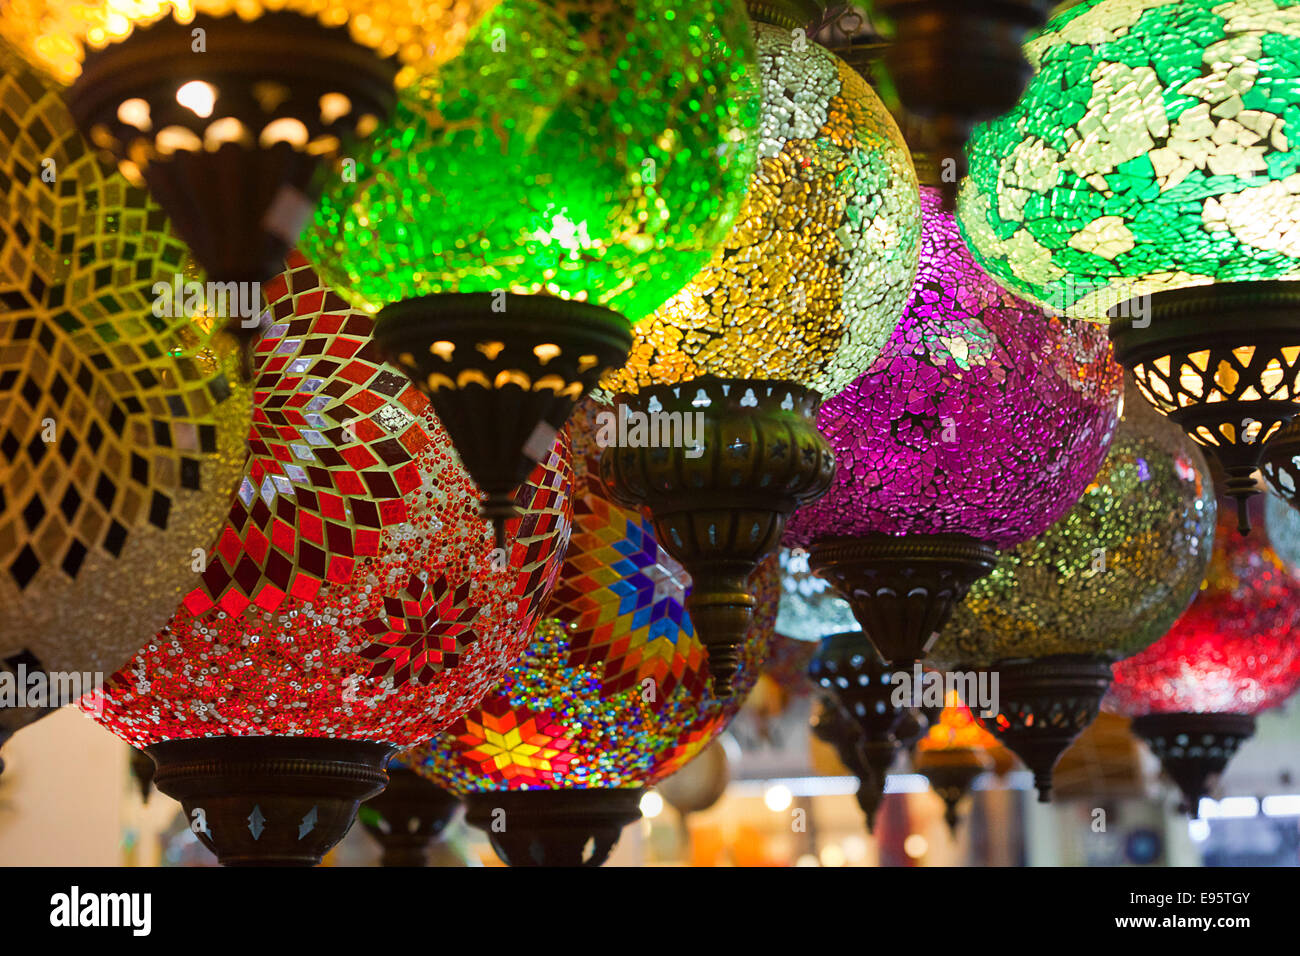 Display of colourful and traditional Turkish mosaic lamps in a shop in Bodrum, Turkey Stock Photo